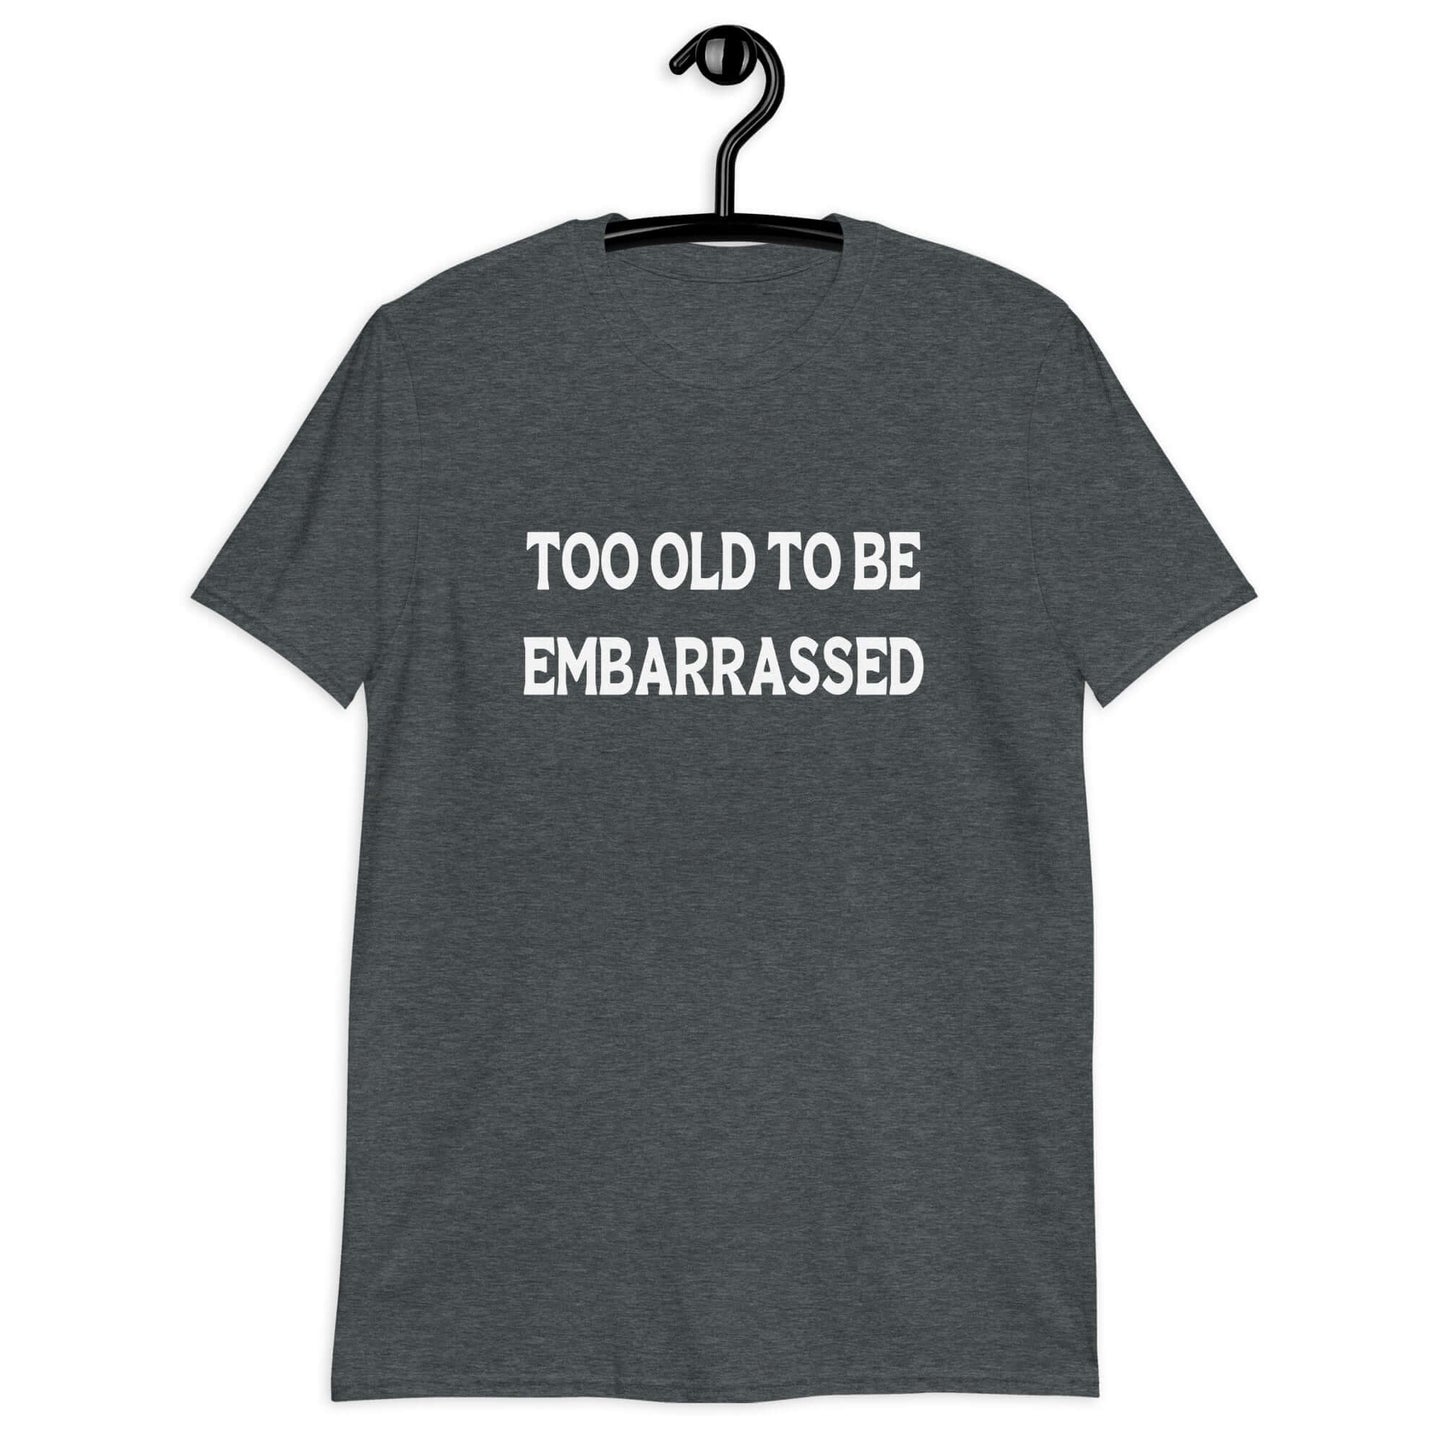 Too old to be embarrassed unisex fit short sleeve t-shirt